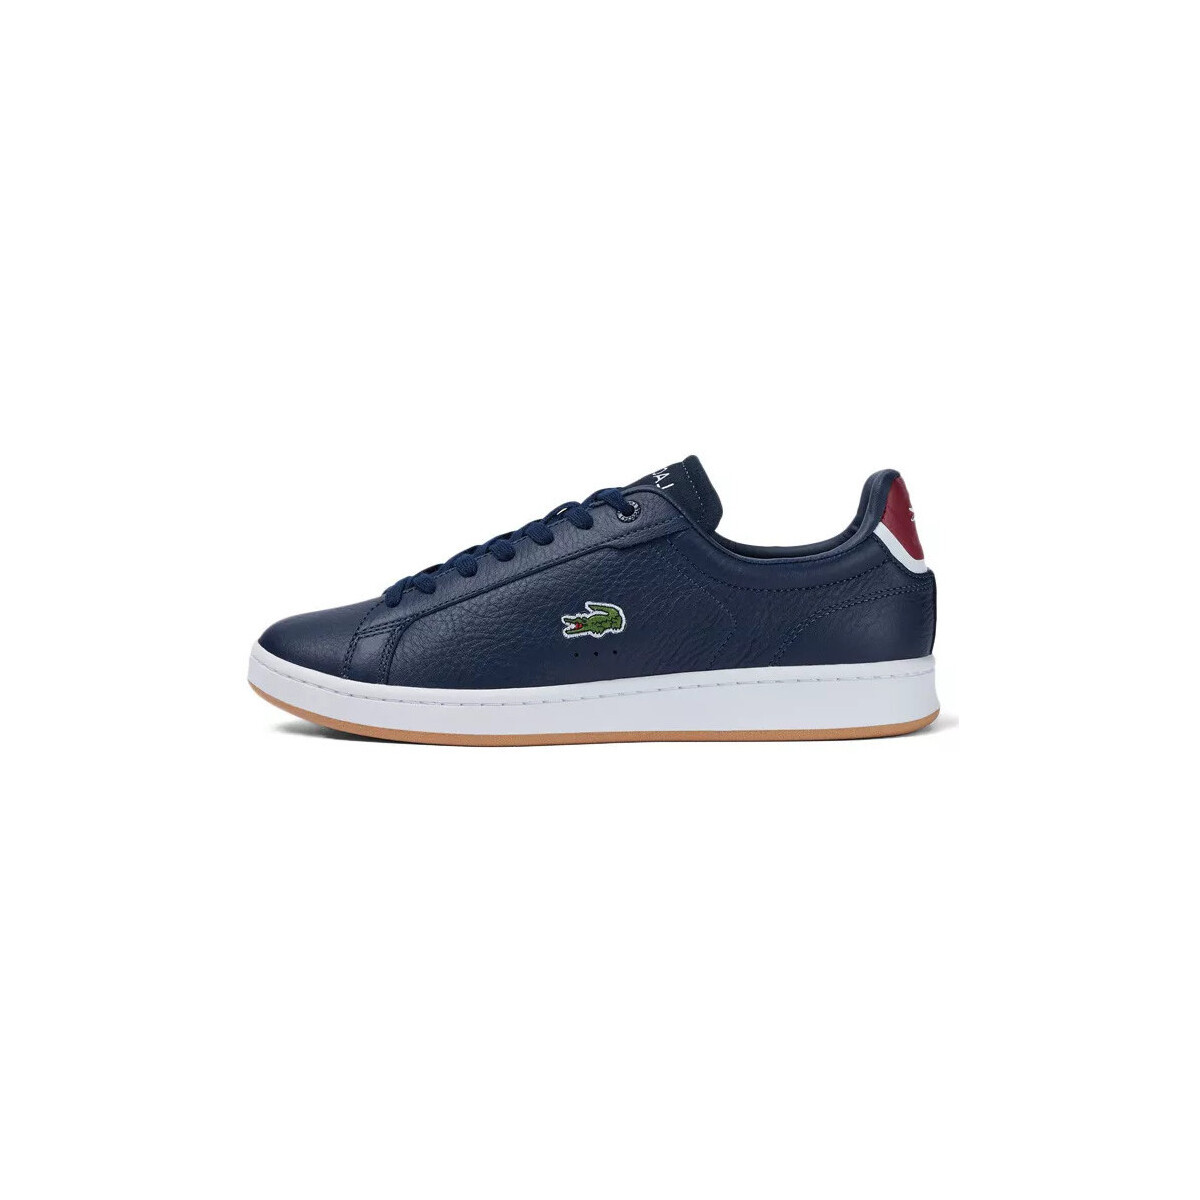 Chaussures Homme Baskets basses Lacoste Carnaby Pro Bleu